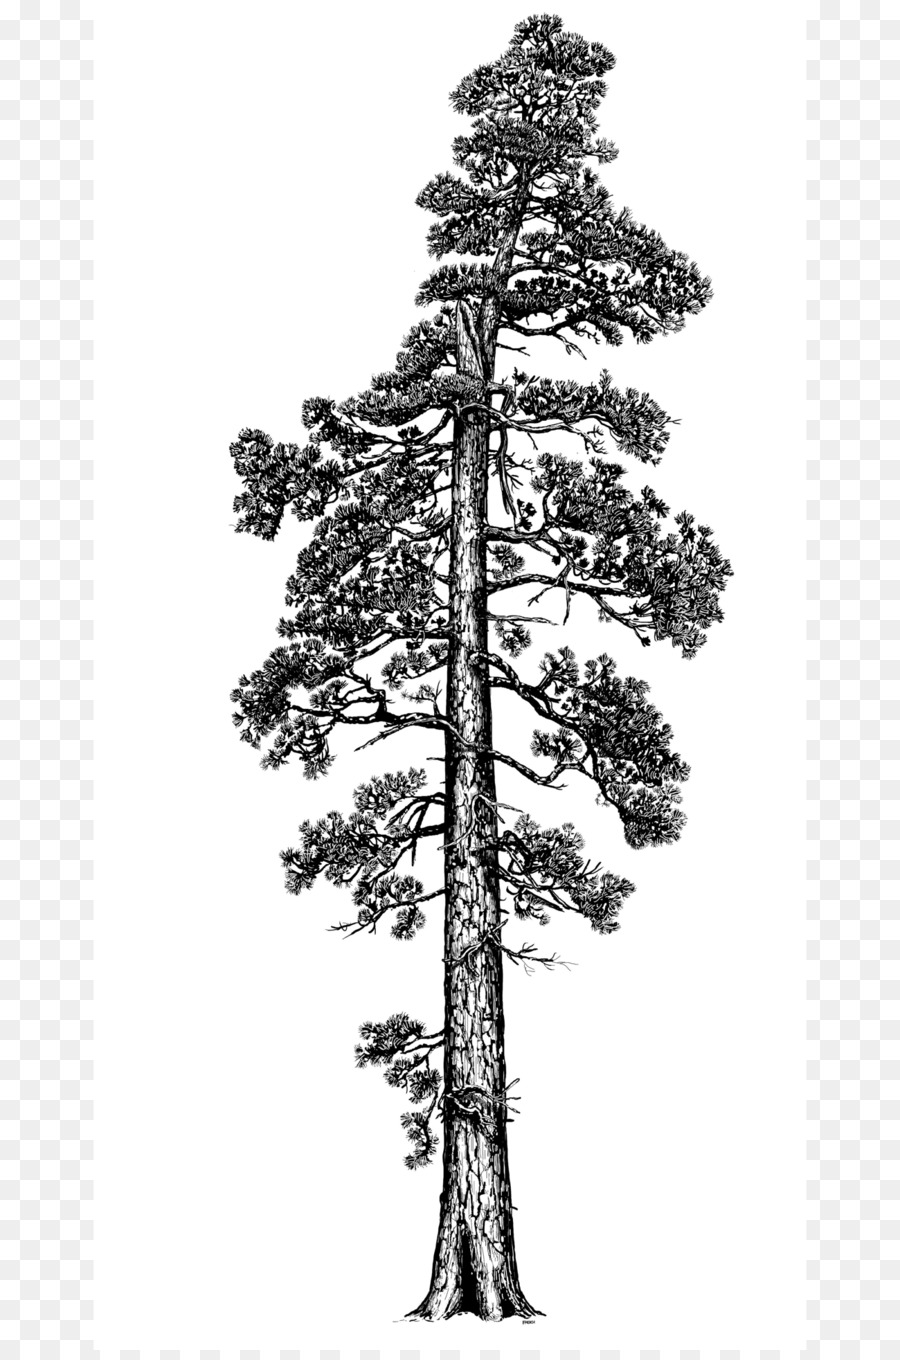 Free Redwood Tree Silhouette Download Png.